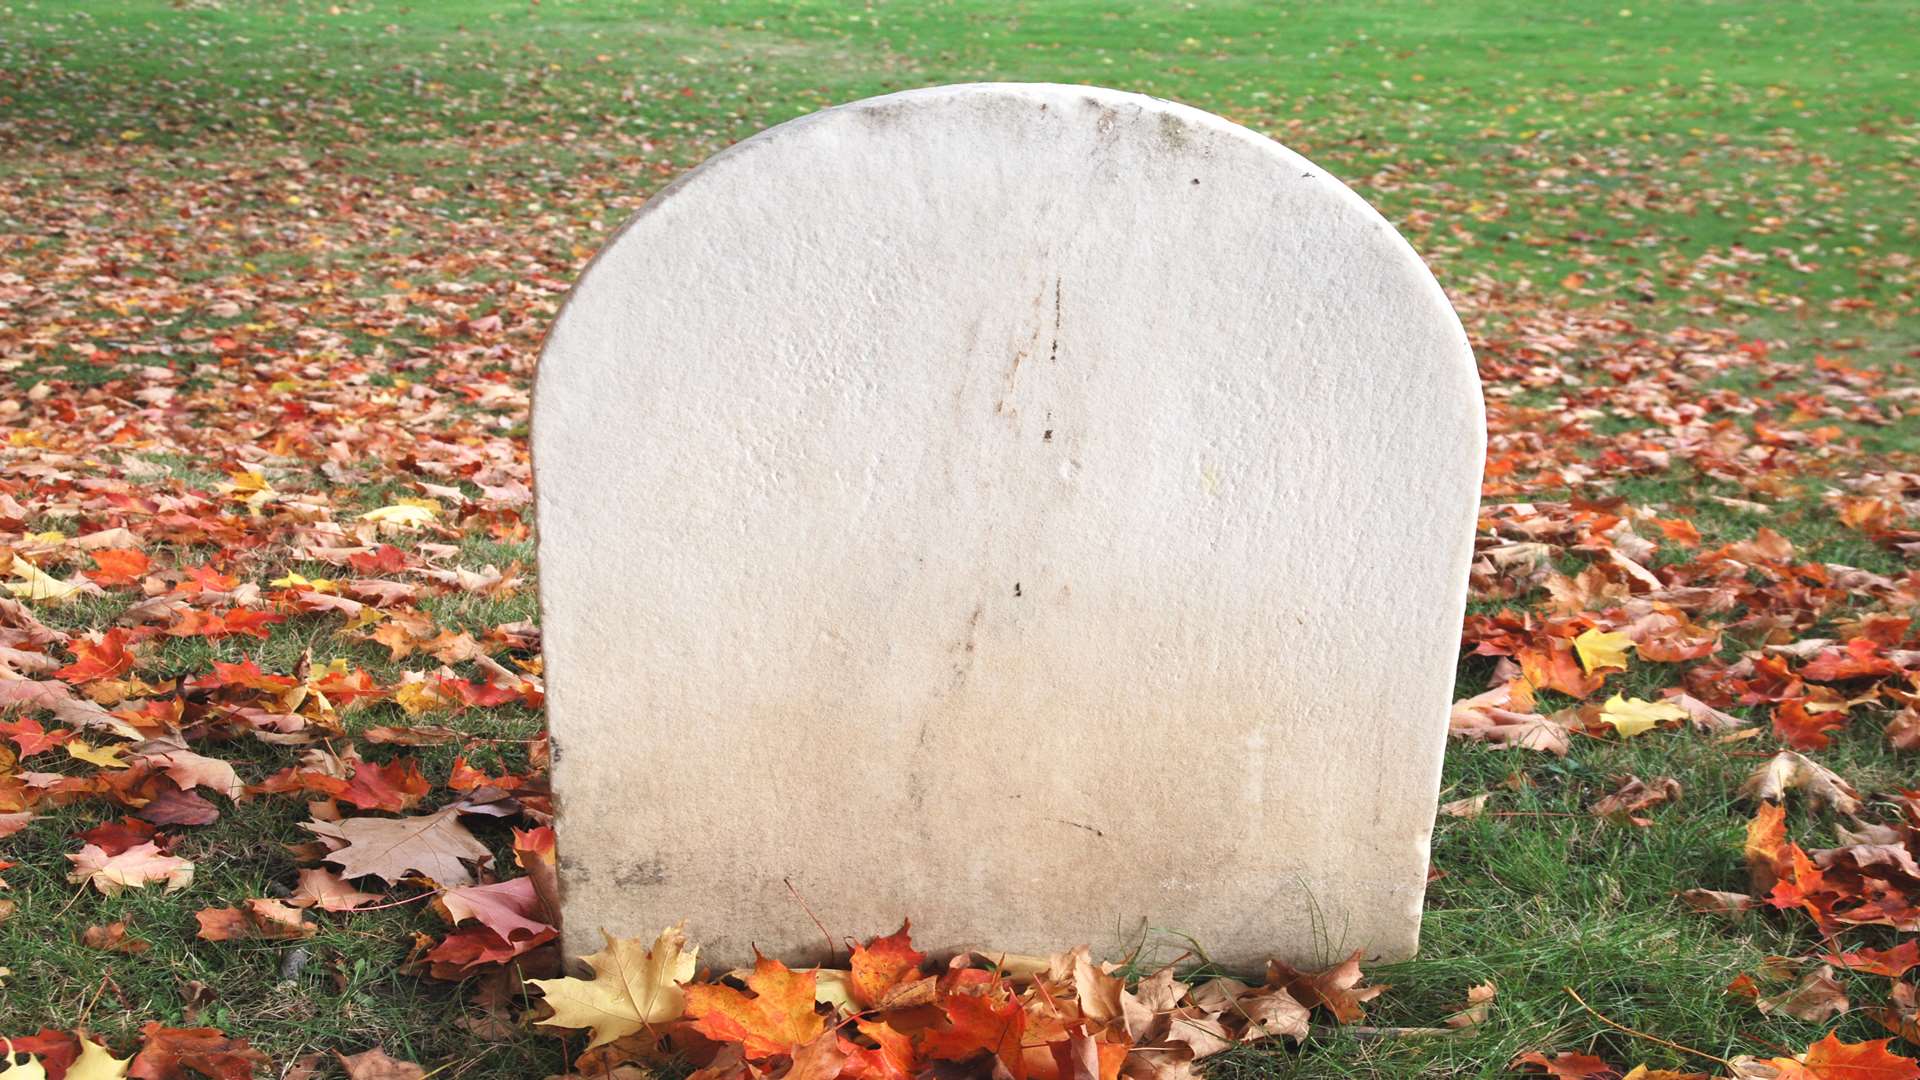 Several gravestones have been damaged. Stock image